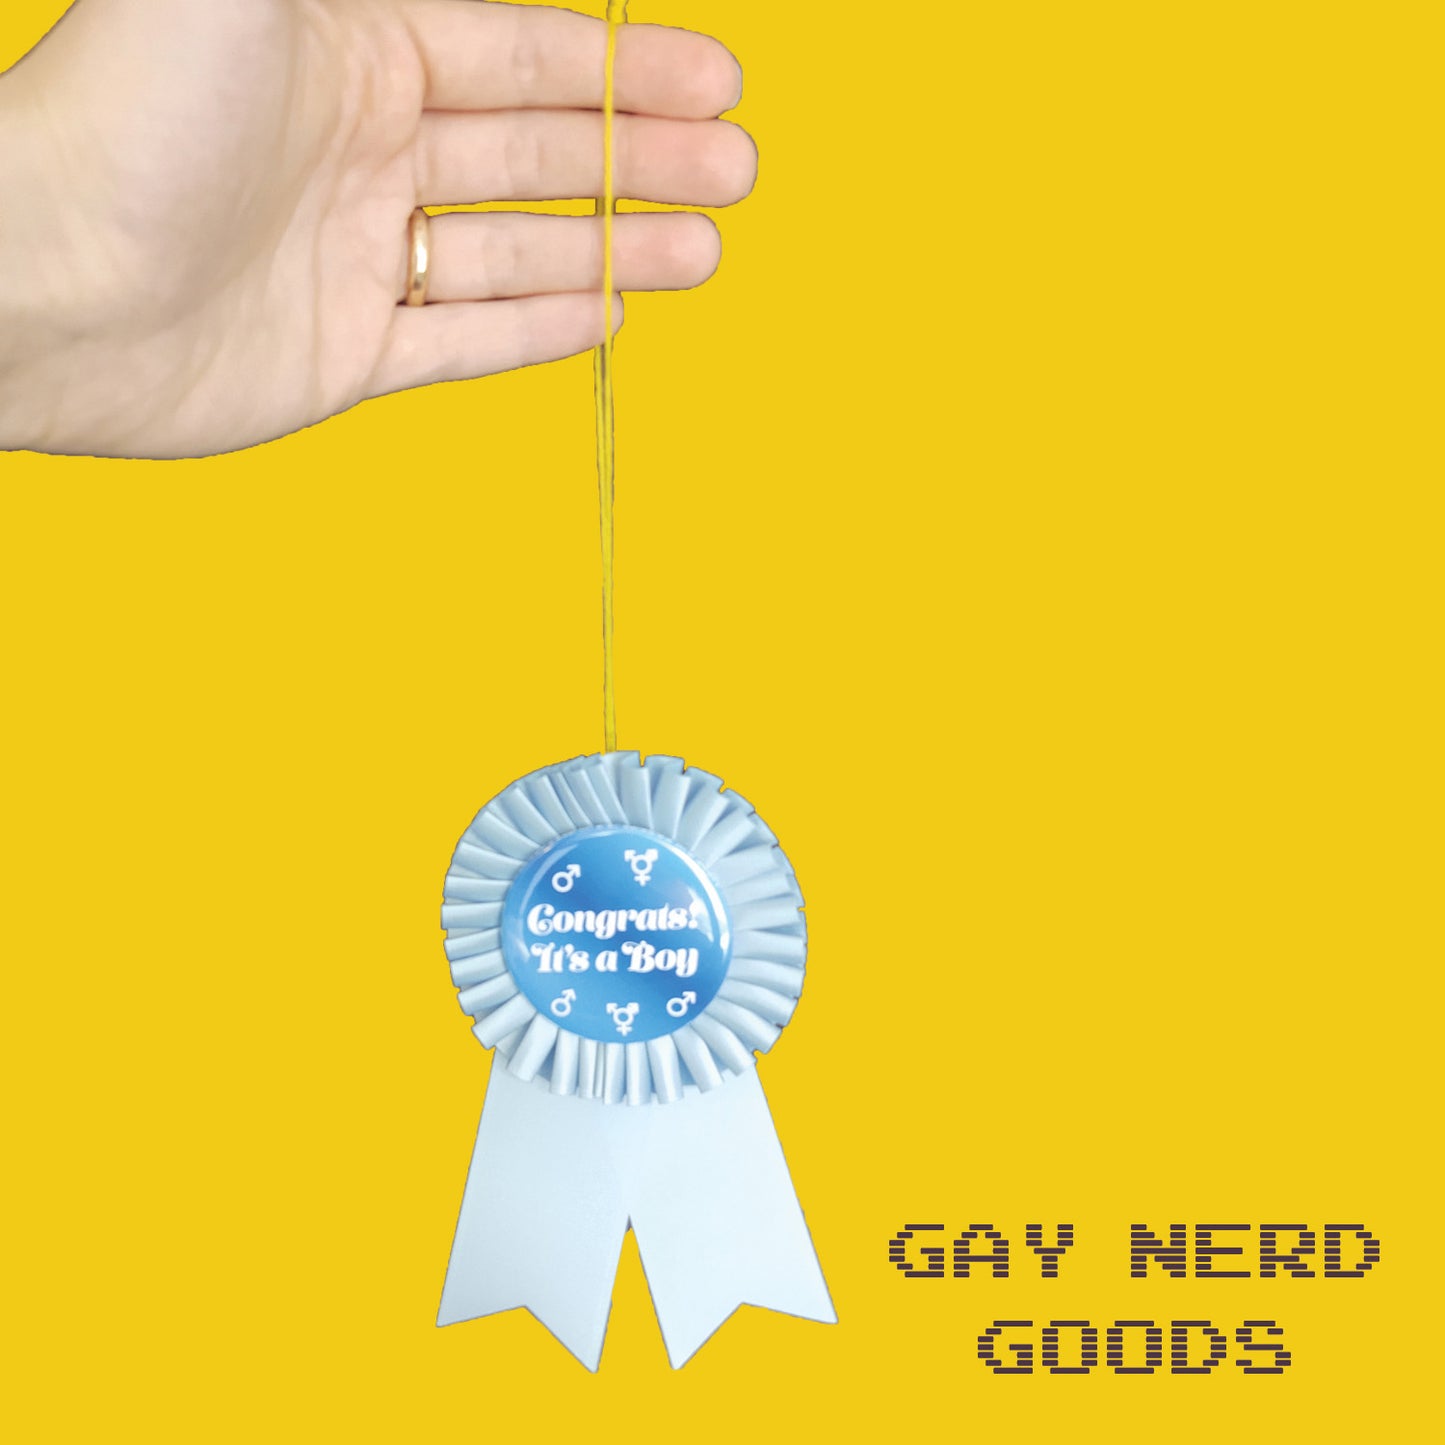 hand holding the thread of the congrats it's a boy gender reveal ribbon on a yellow background